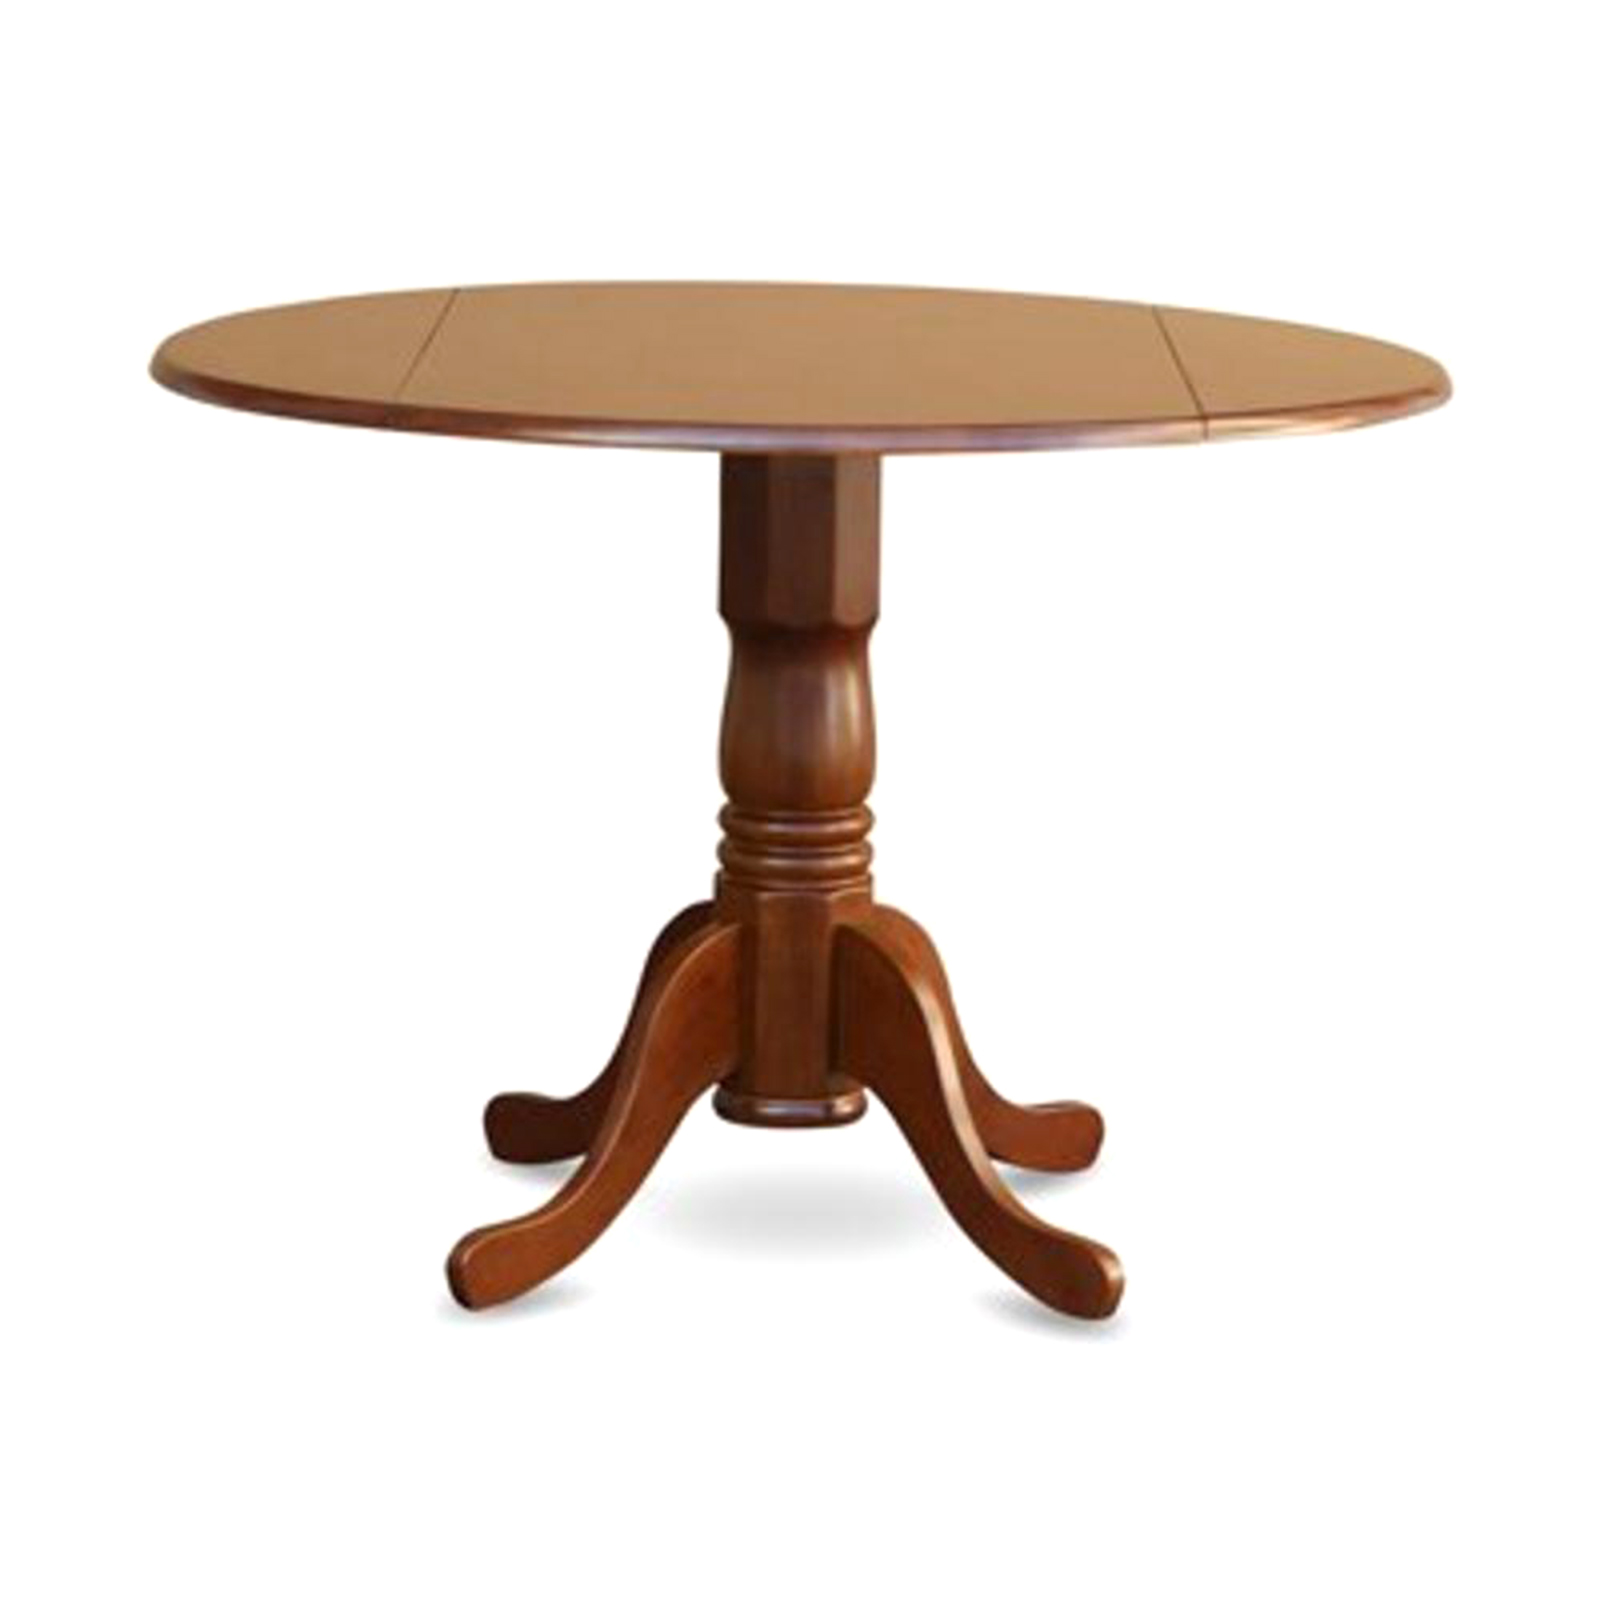 East West Furniture DLT Dublin Round Solid Asian Wood Kitchen Table - Saddle Brown